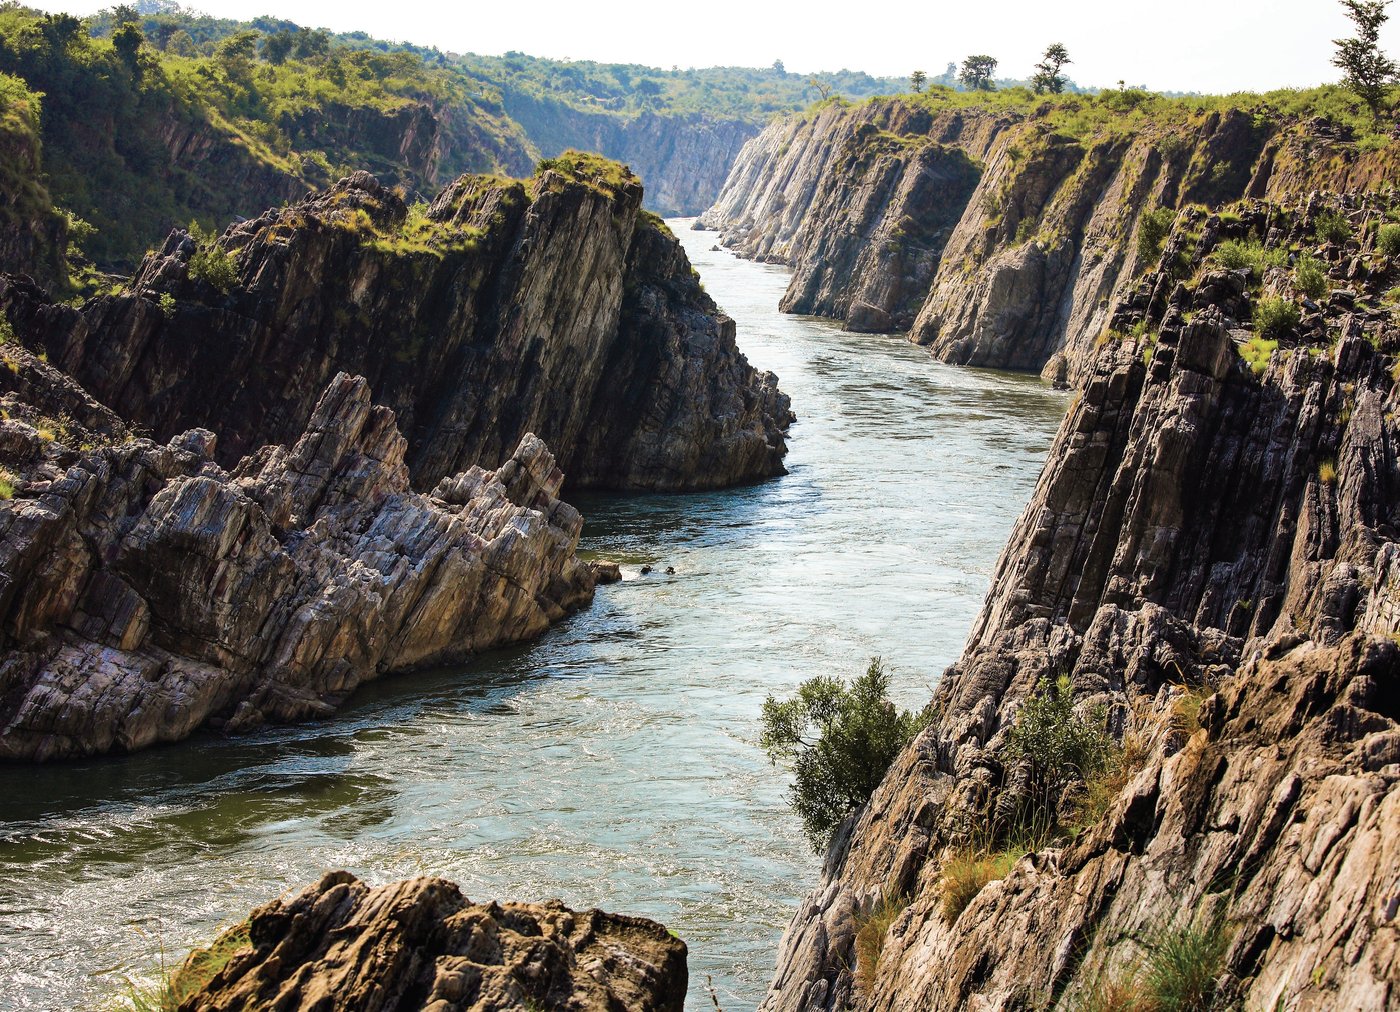 Hey, We Bet You Can’t Get Better Than 80% On This Random Knowledge Quiz Narmada River